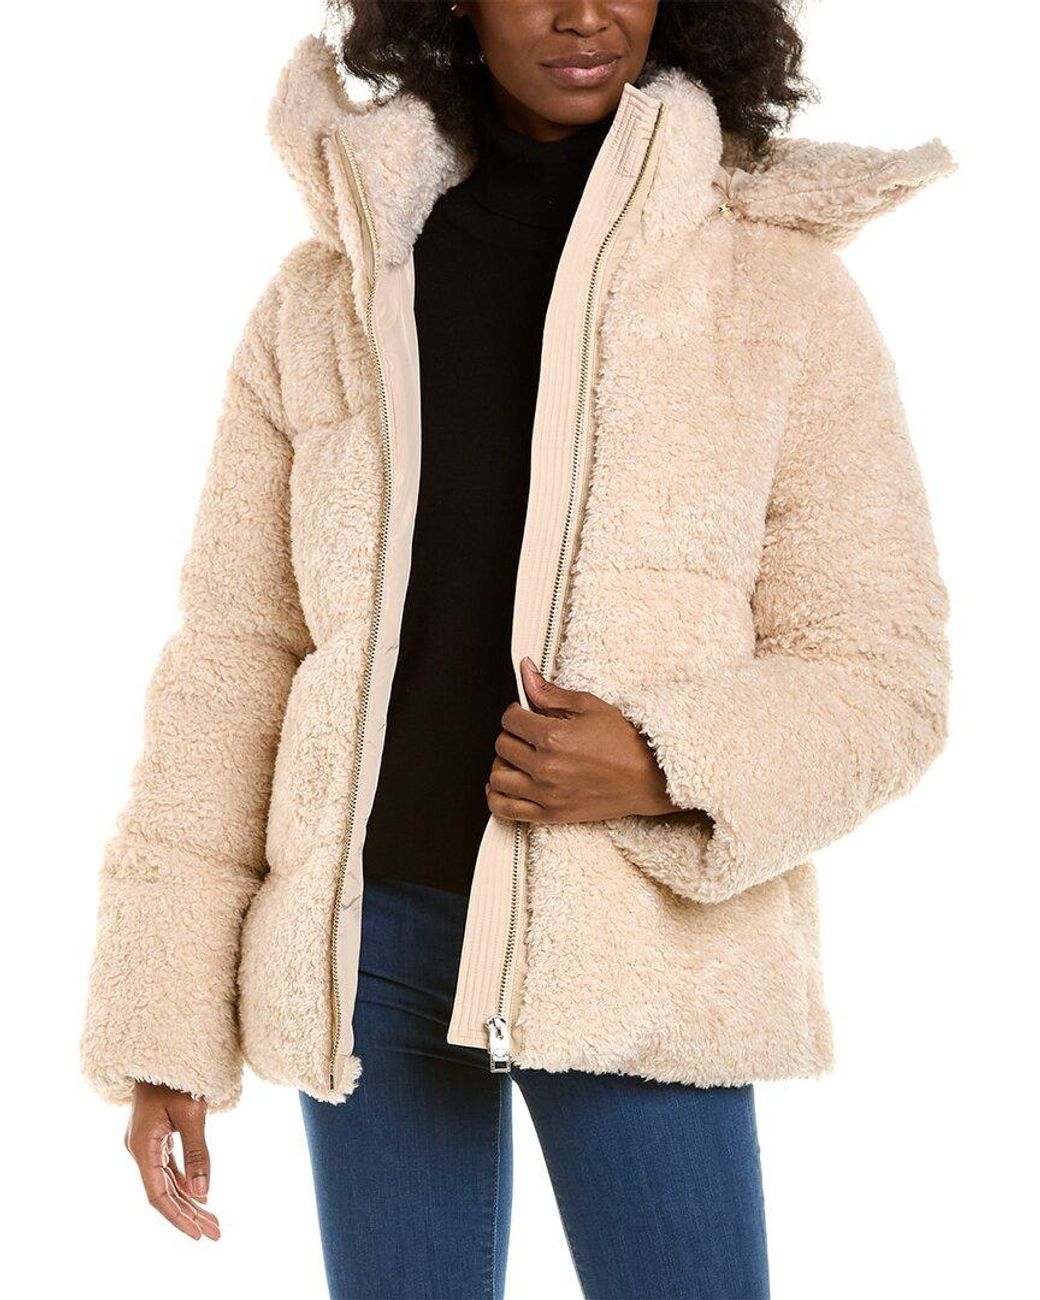 nb series by nicole benisti Naka Quilted Down Coat in Natural | Lyst